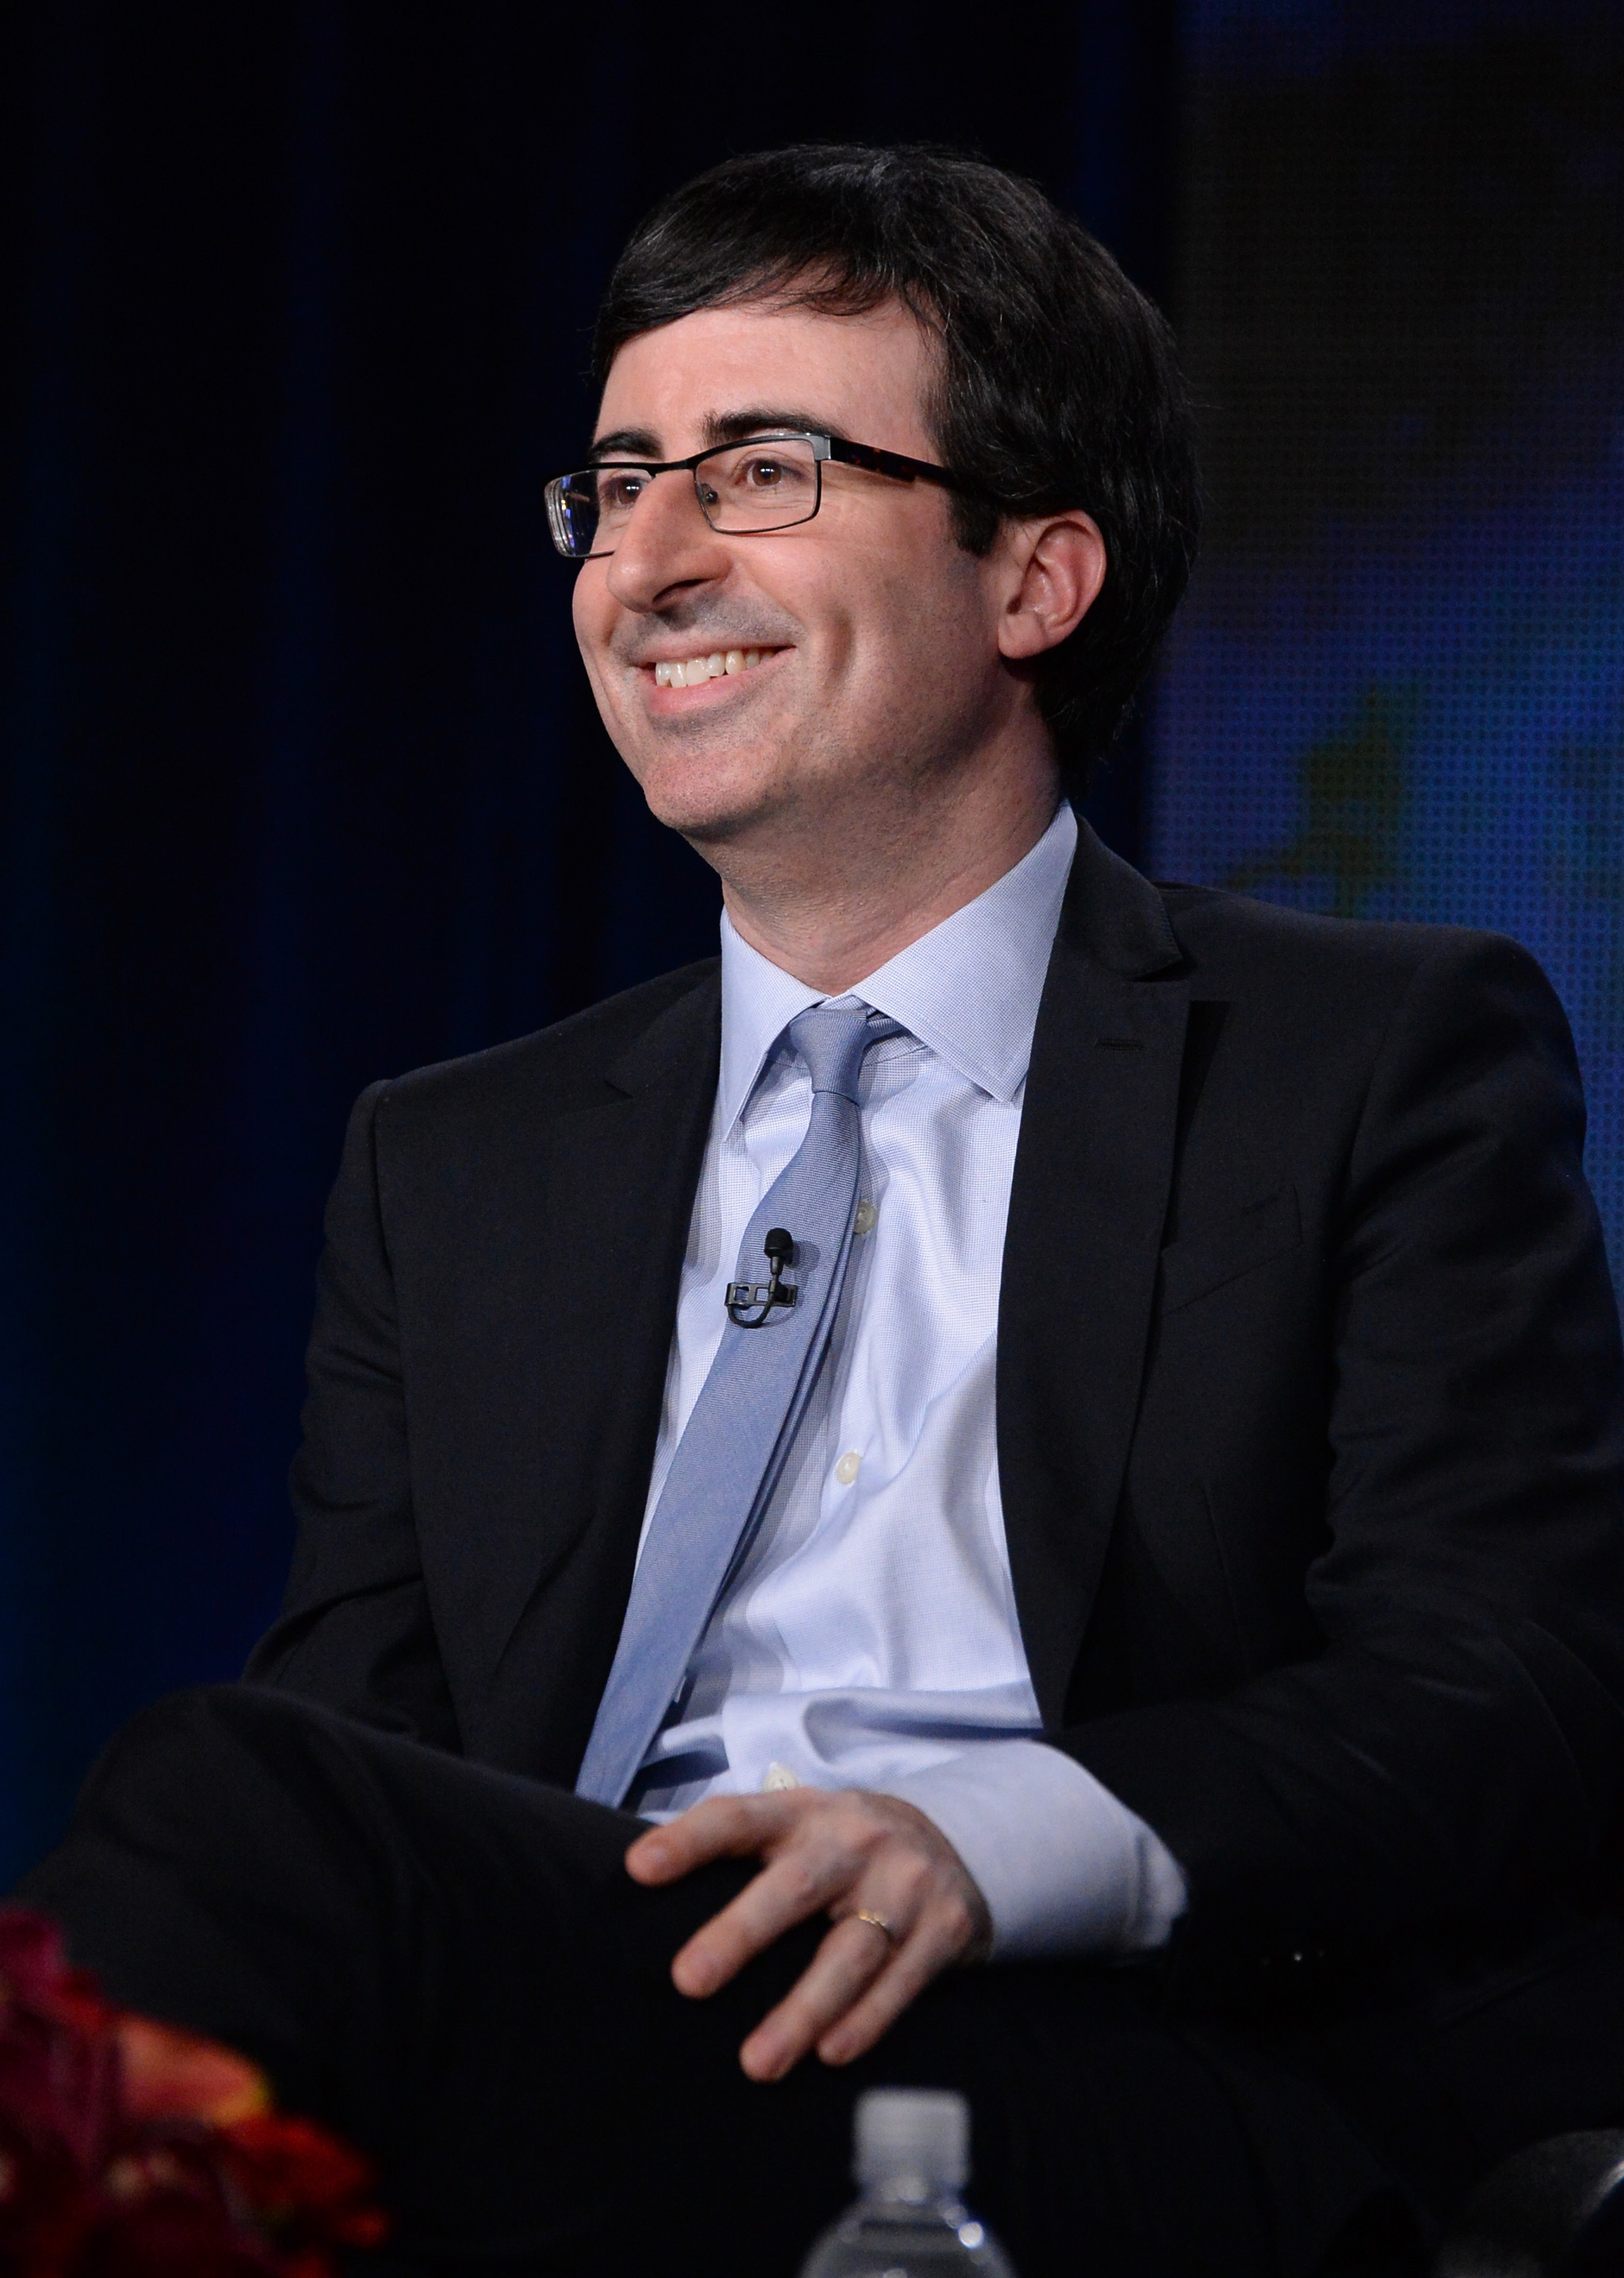 John Oliver speaks onstage during the HBO Winter 2014 TCA Panel at The Langham Huntington Hotel and Spa on Jan. 9, 2014 in Pasadena, Calif.